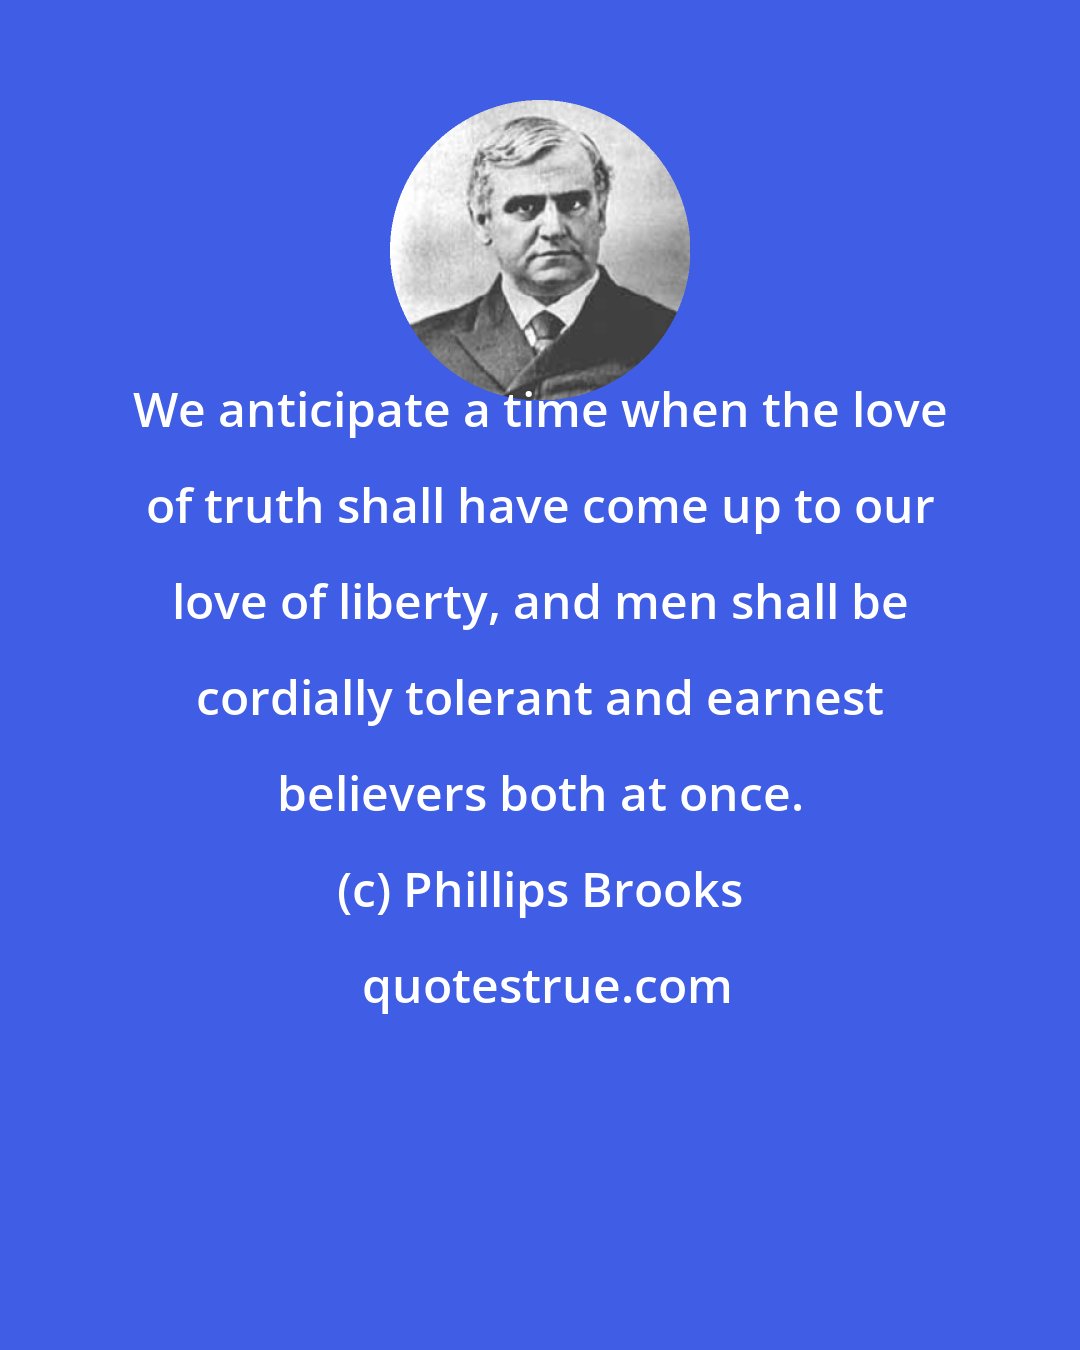 Phillips Brooks: We anticipate a time when the love of truth shall have come up to our love of liberty, and men shall be cordially tolerant and earnest believers both at once.